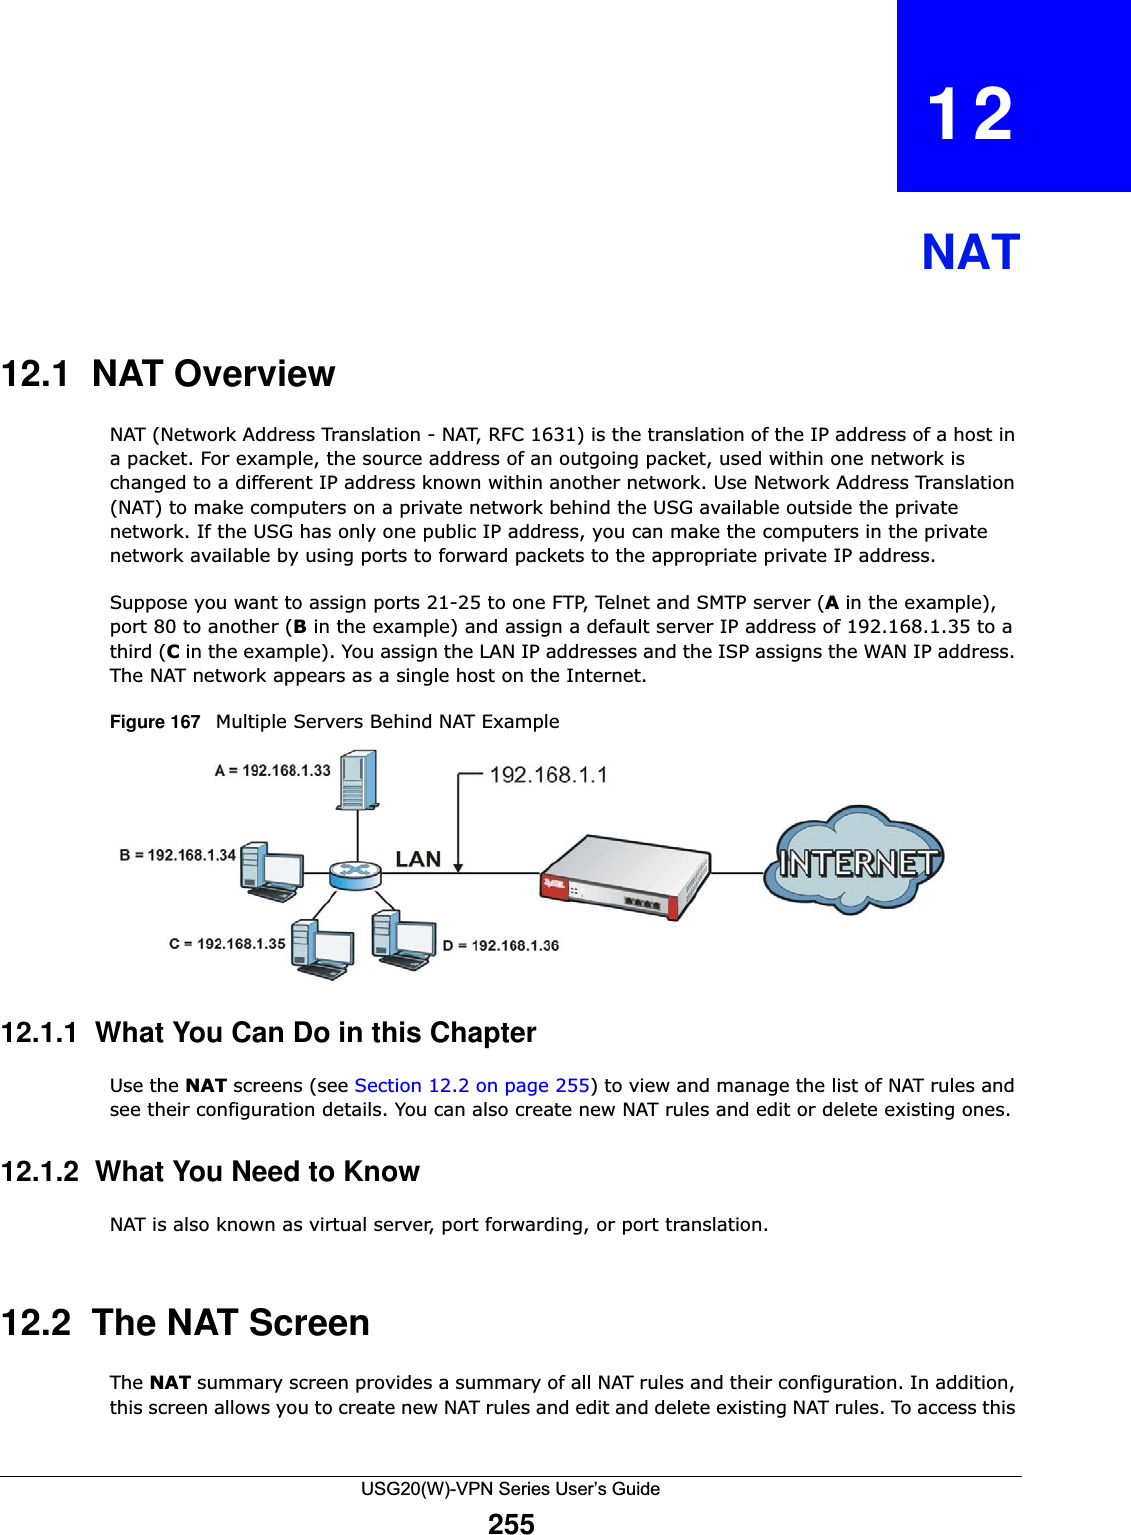 USG20(W)-VPN Series User’s Guide255CHAPTER   12NAT12.1  NAT OverviewNAT (Network Address Translation - NAT, RFC 1631) is the translation of the IP address of a host in a packet. For example, the source address of an outgoing packet, used within one network is changed to a different IP address known within another network. Use Network Address Translation (NAT) to make computers on a private network behind the USG available outside the private network. If the USG has only one public IP address, you can make the computers in the private network available by using ports to forward packets to the appropriate private IP address. Suppose you want to assign ports 21-25 to one FTP, Telnet and SMTP server (A in the example), port 80 to another (B in the example) and assign a default server IP address of 192.168.1.35 to a third (C in the example). You assign the LAN IP addresses and the ISP assigns the WAN IP address. The NAT network appears as a single host on the Internet.Figure 167   Multiple Servers Behind NAT Example12.1.1  What You Can Do in this ChapterUse the NAT screens (see Section 12.2 on page 255) to view and manage the list of NAT rules and see their configuration details. You can also create new NAT rules and edit or delete existing ones. 12.1.2  What You Need to KnowNAT is also known as virtual server, port forwarding, or port translation.12.2  The NAT ScreenThe NAT summary screen provides a summary of all NAT rules and their configuration. In addition, this screen allows you to create new NAT rules and edit and delete existing NAT rules. To access this 